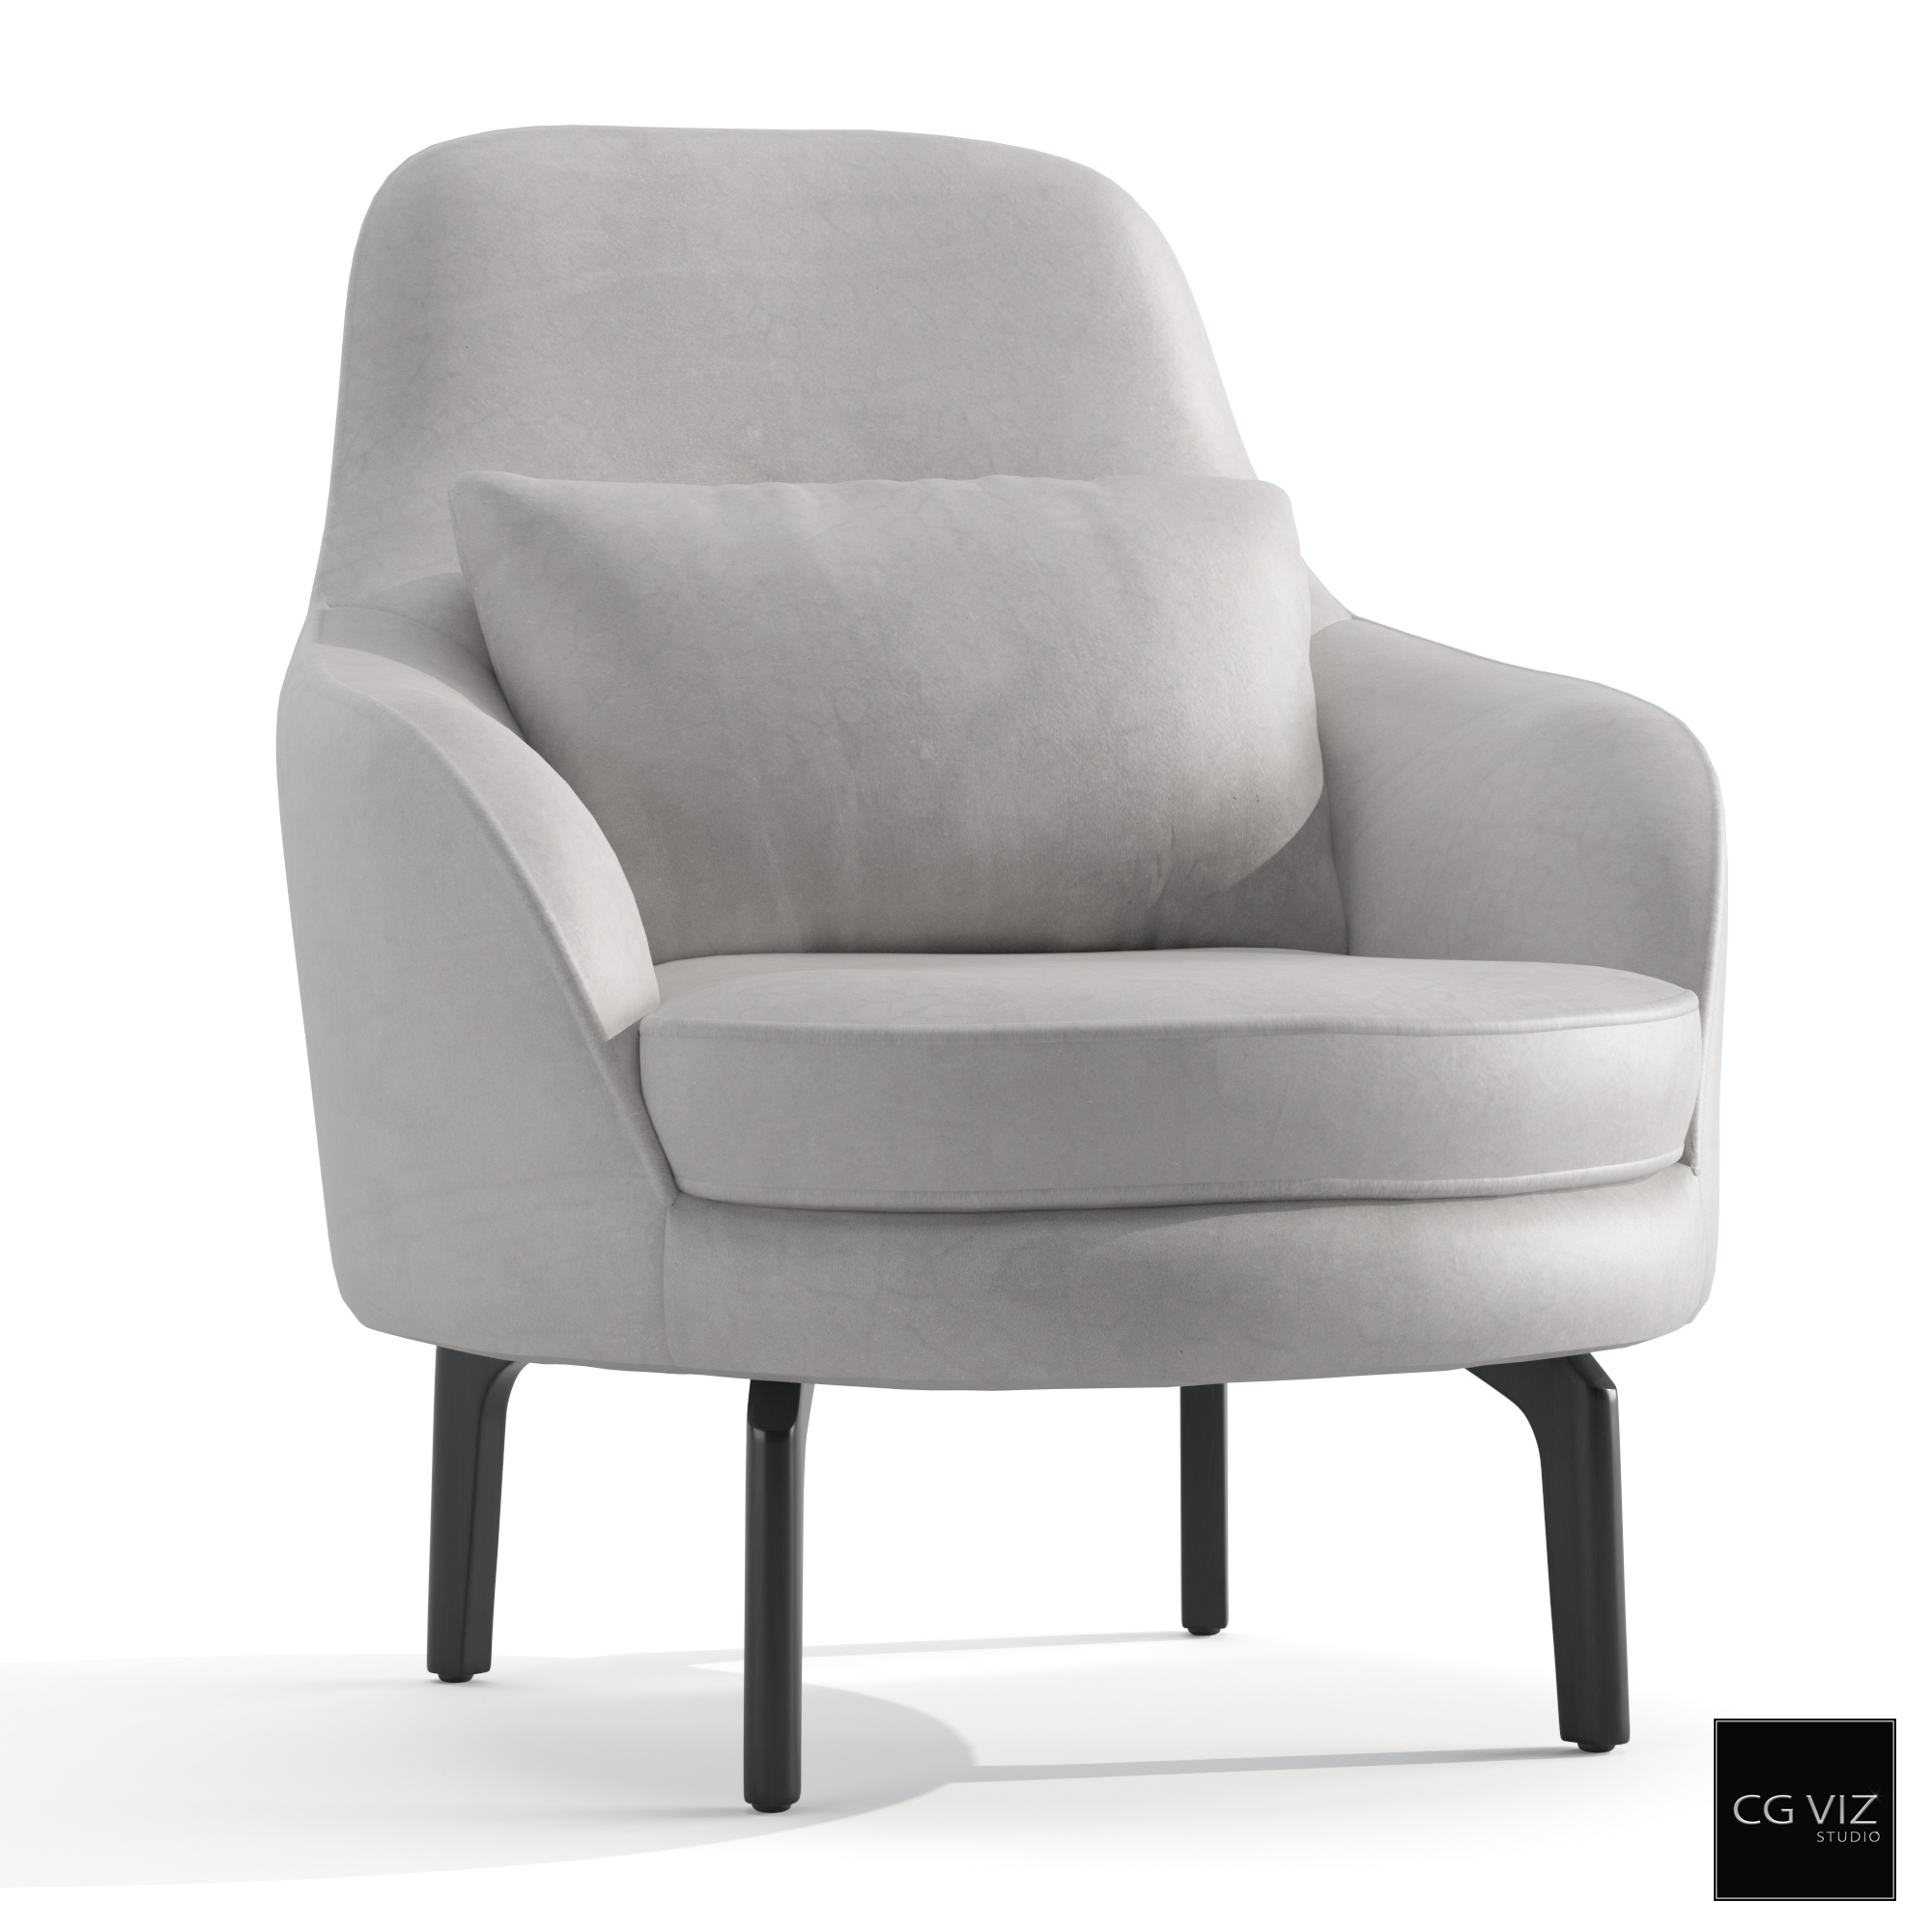 Rendered Preview of Calligaris Medea Lounge Chair 3D Model